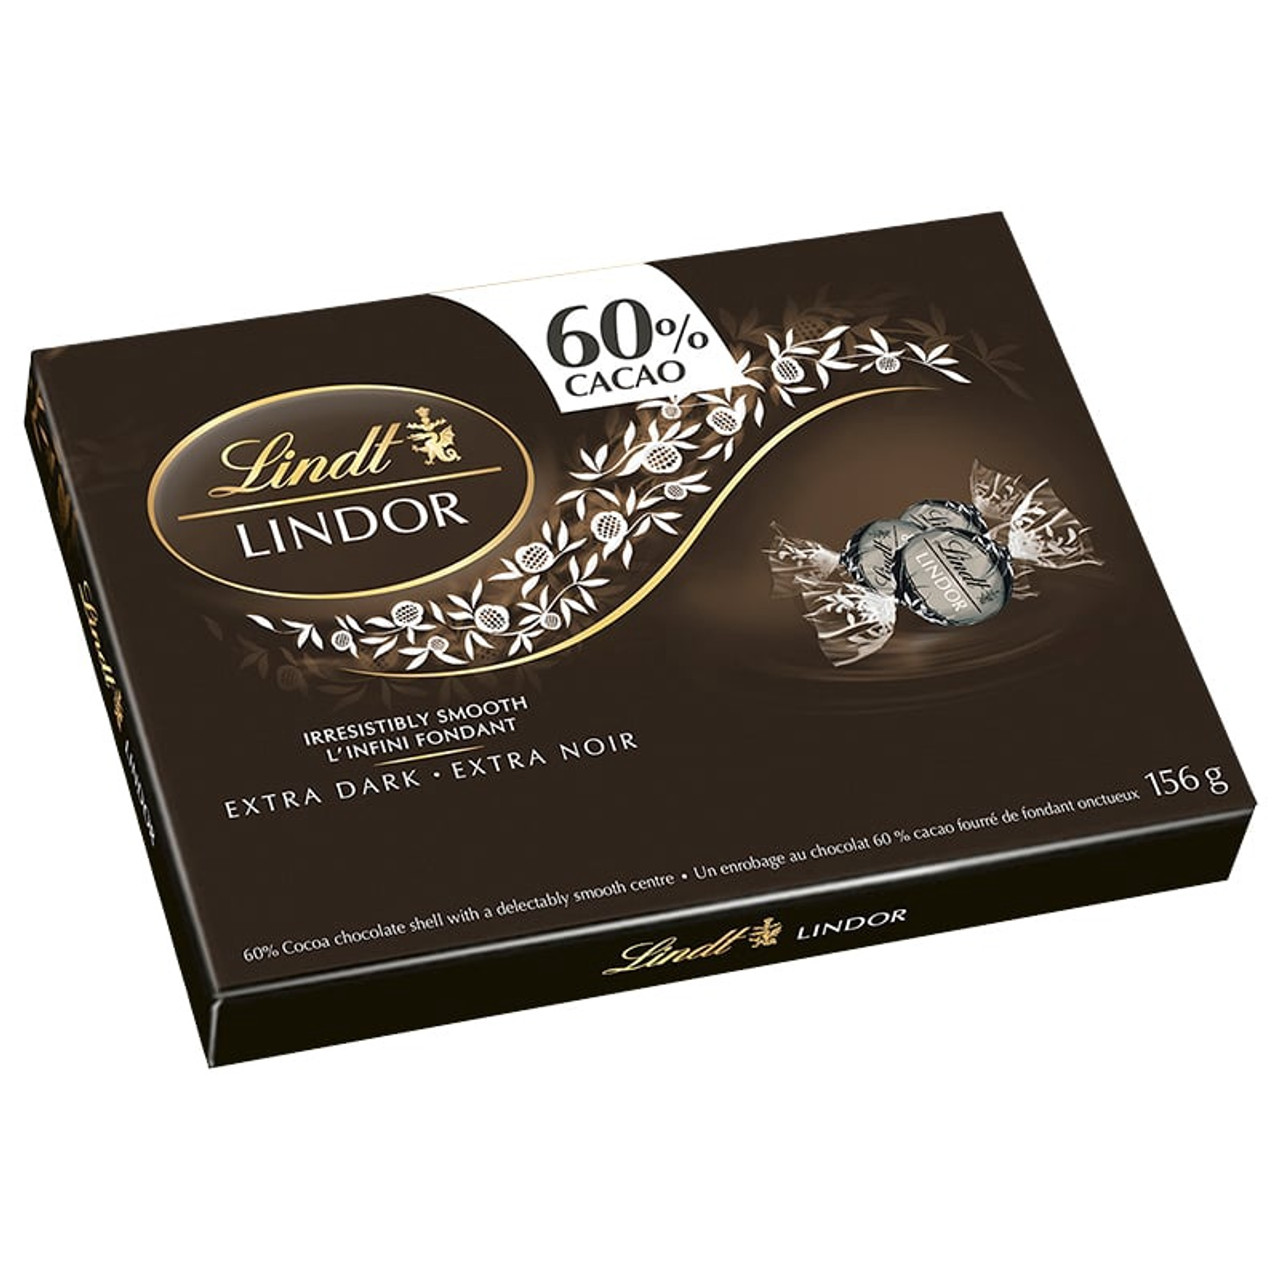 Lindt Lindor Extra Dark 60 Cacao Chocolate Box 156g A Ally And Sons 8008